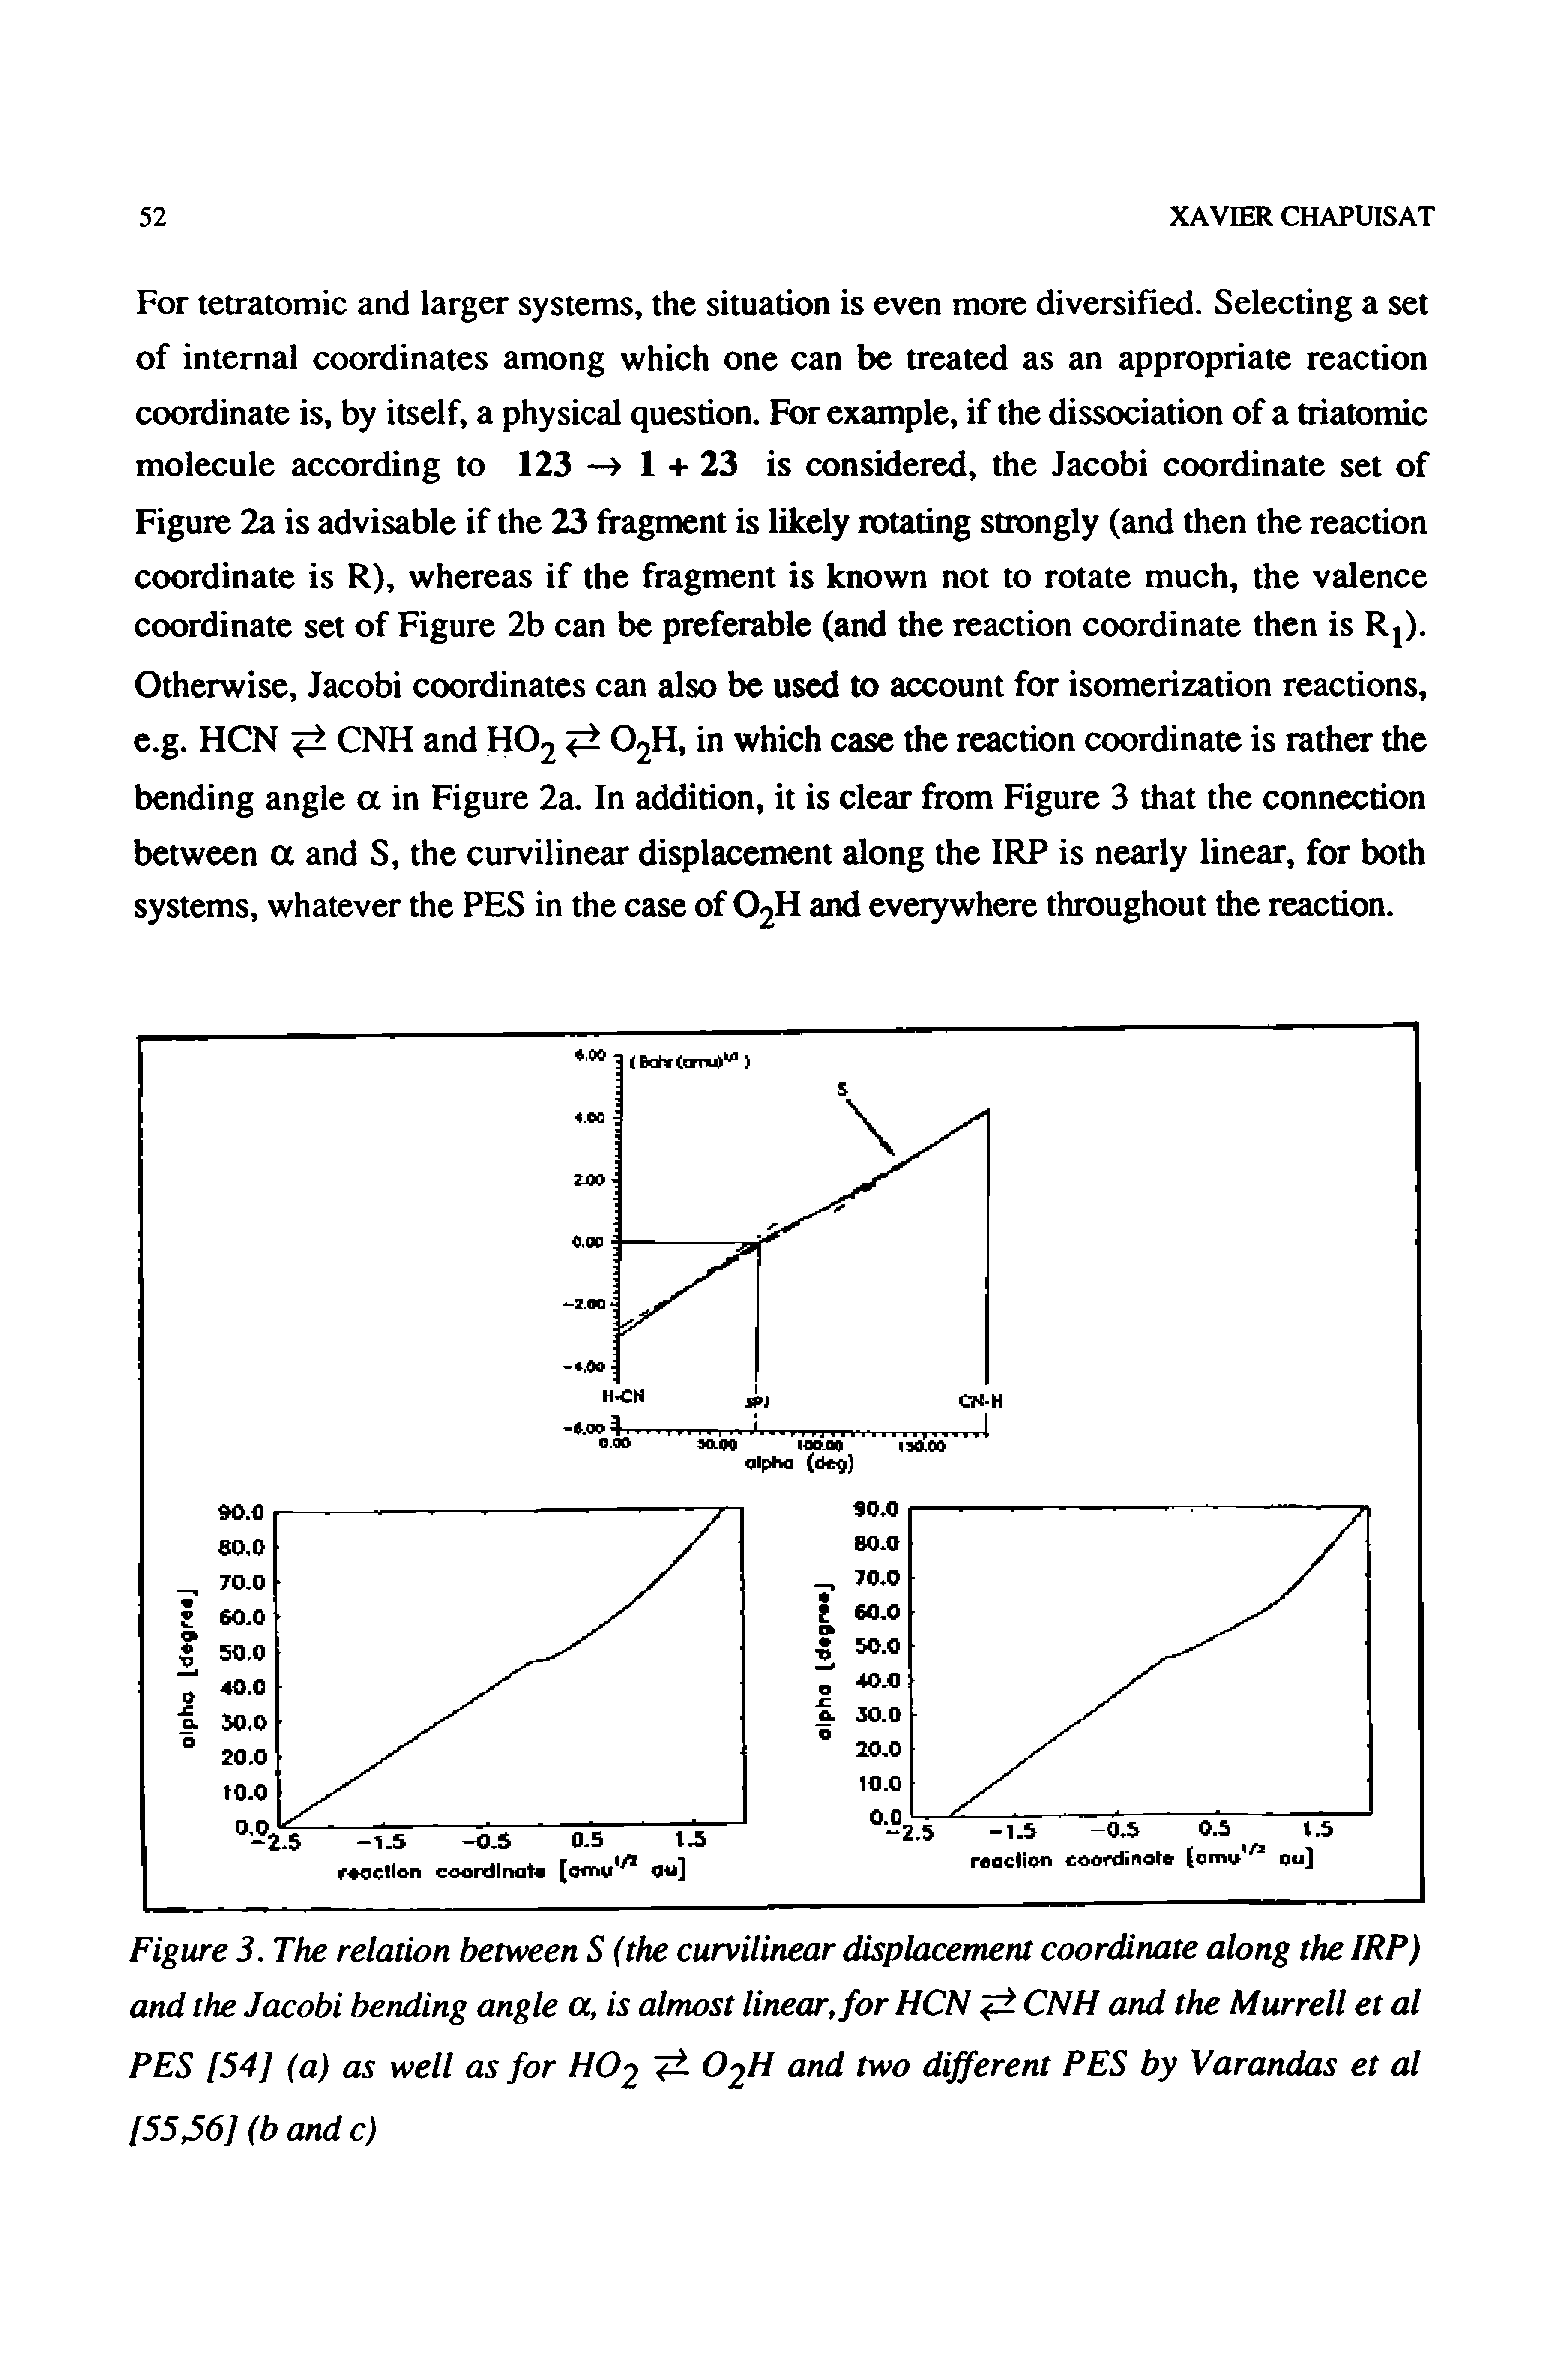 Figure 3. The relation between S (the curvilinear displacement coordinate along the IRP) and the Jacobi bending angle a, is almost linear, for HCN CNH and the Murrell et al PES [54] (a) as well as for HO2 O2H and two different PES by Varandas et al [55,56] (b and c)...